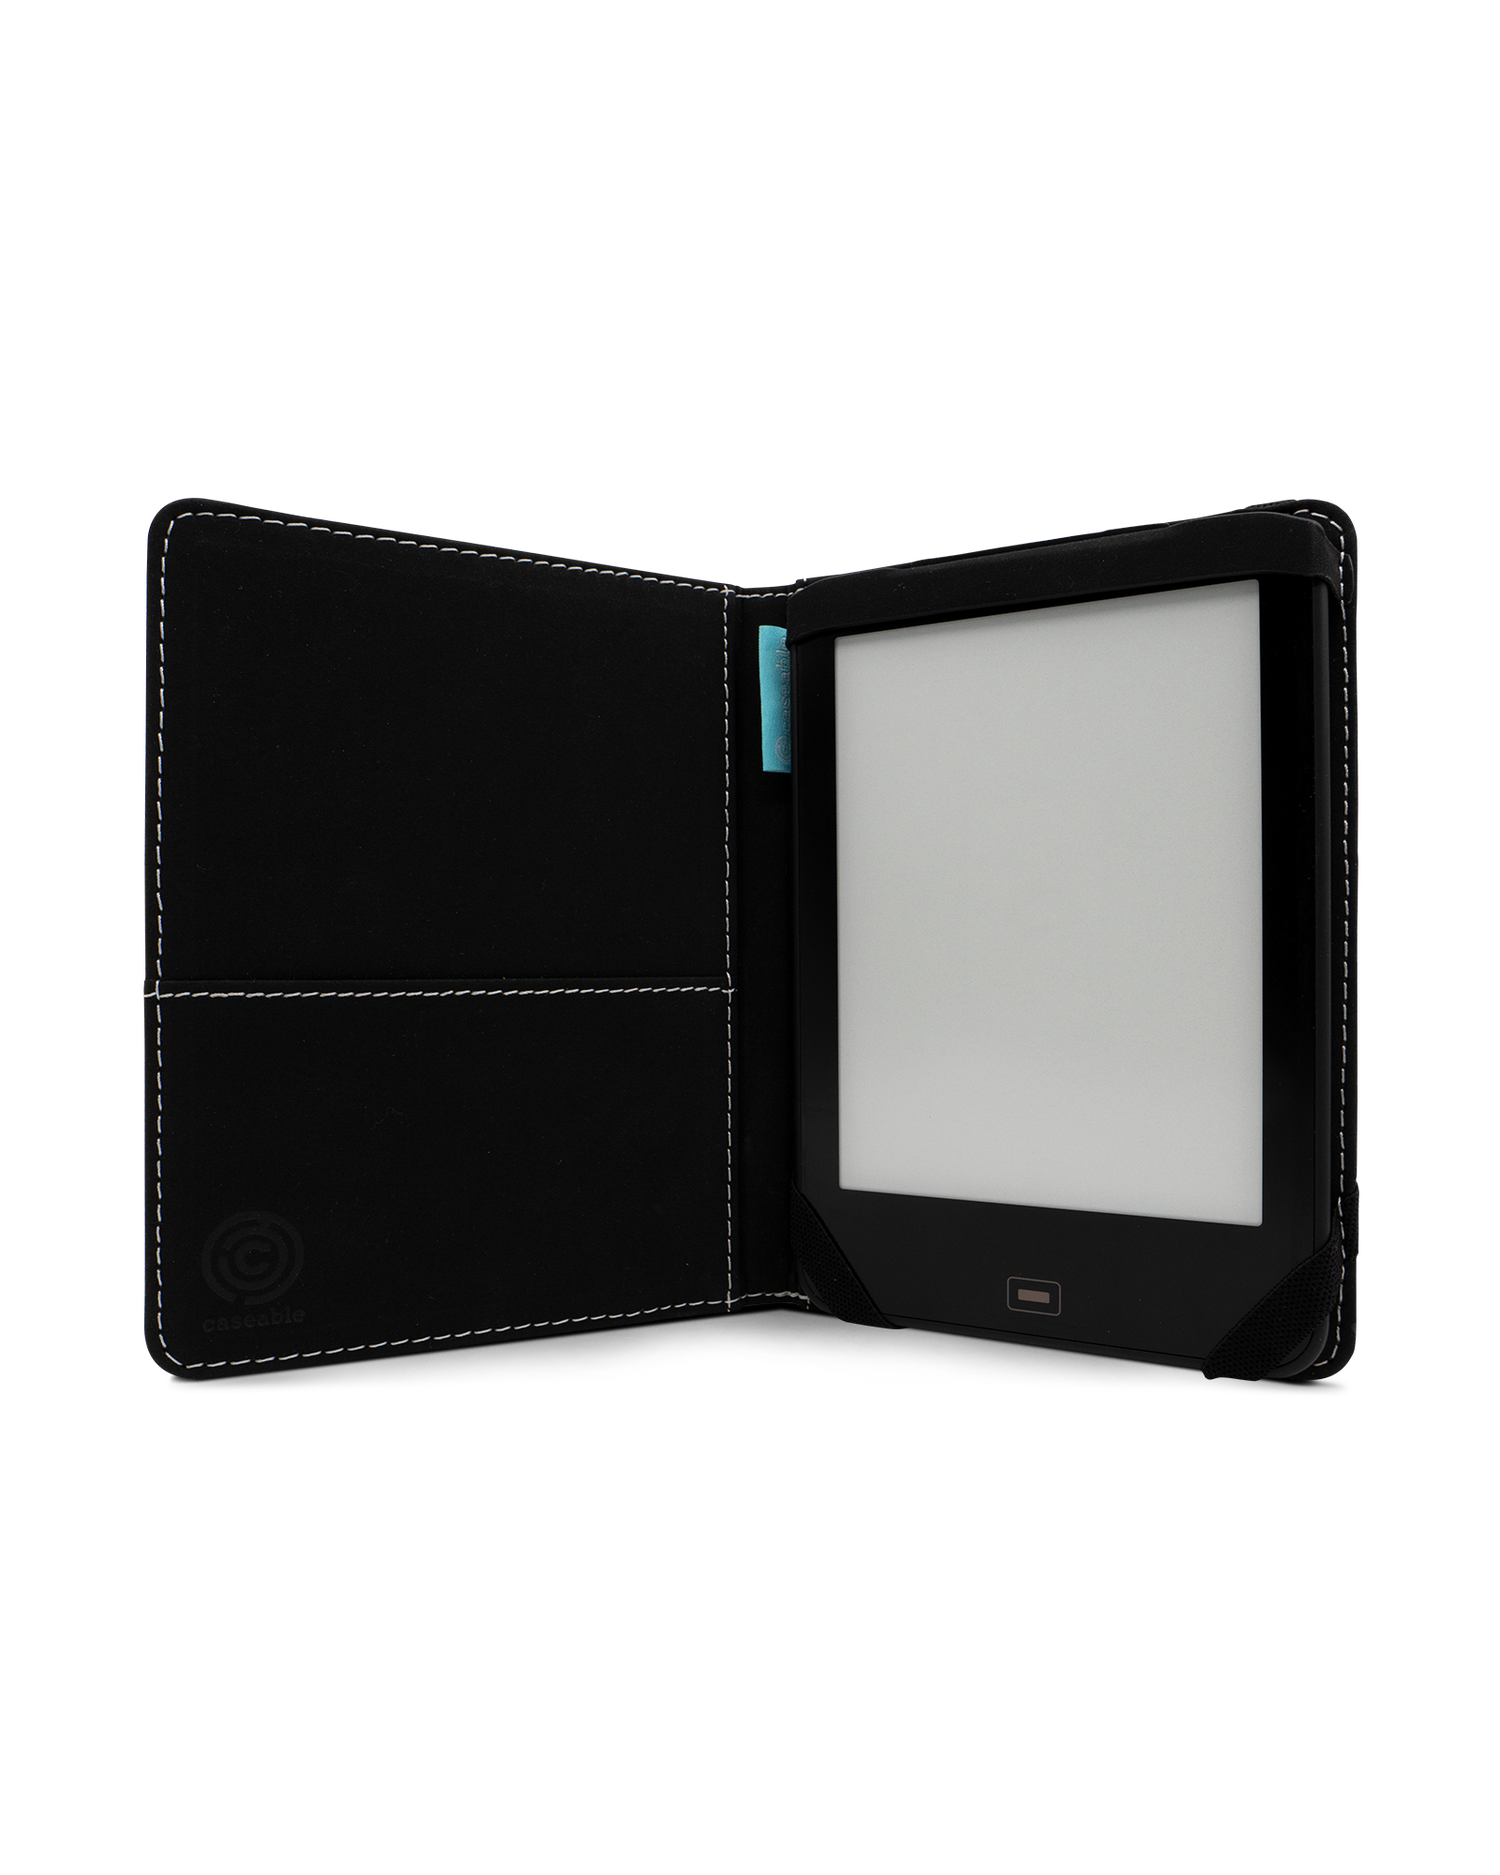 Orchid eReader Case for tolino vision 1 to 4 HD: Opened interior view